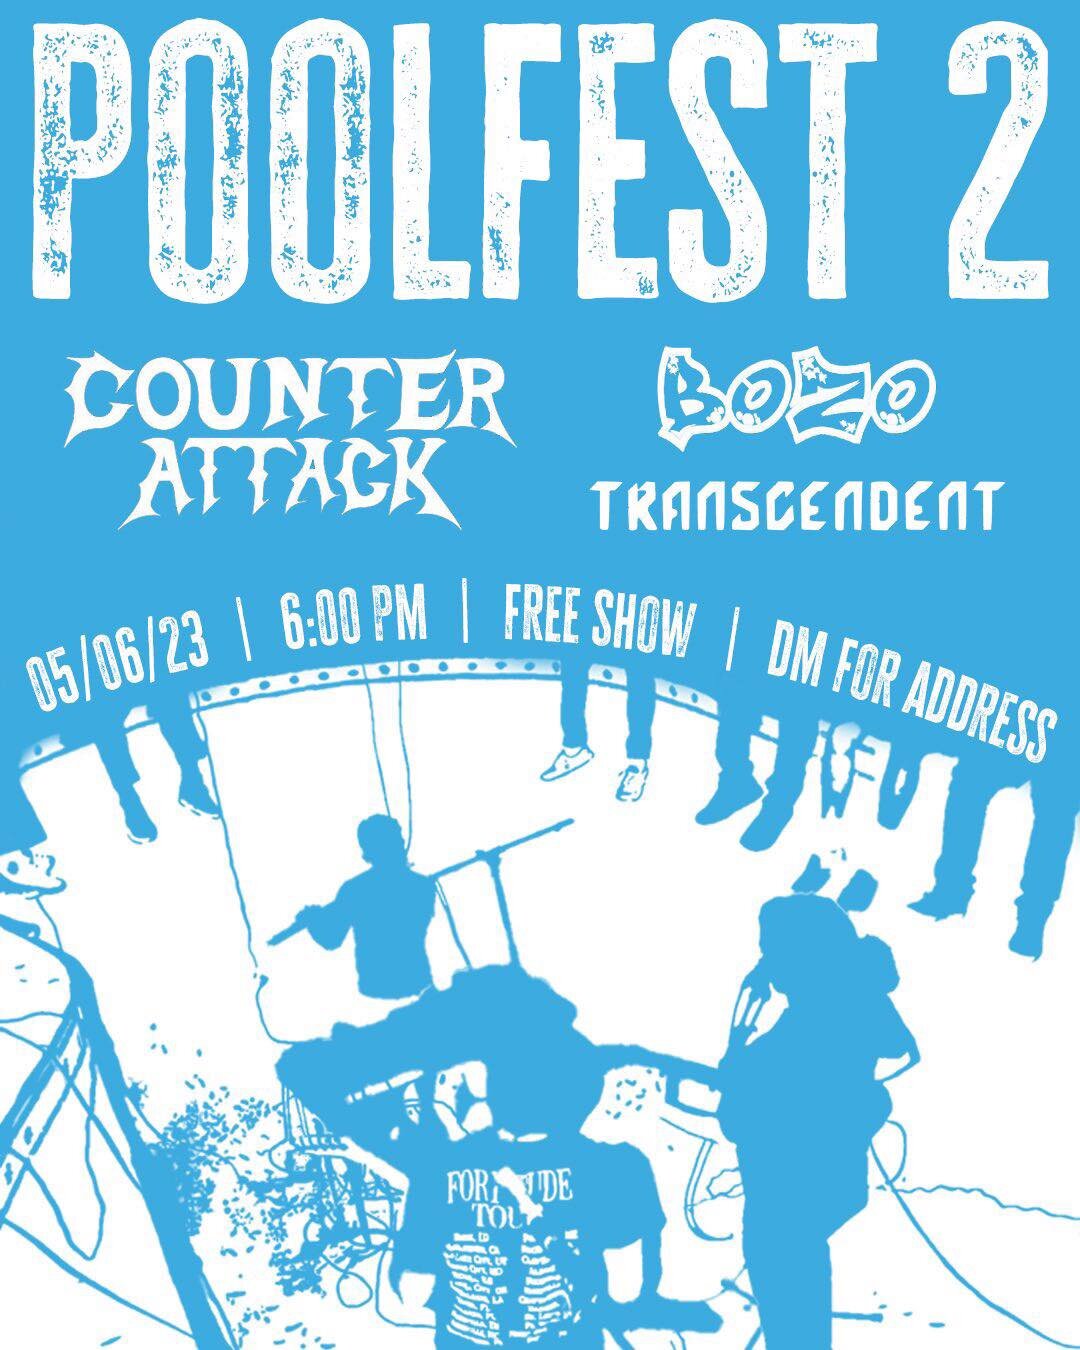 🚨‼️SHOW ALERT‼️🚨

We&rsquo;ll be playing POOLFEST 2 w/ Transcendent &amp; Counter Attack! 

💵FREE SHOW💵

Saturday, May 6th @ 6:00 

DM US for the address! 🏠